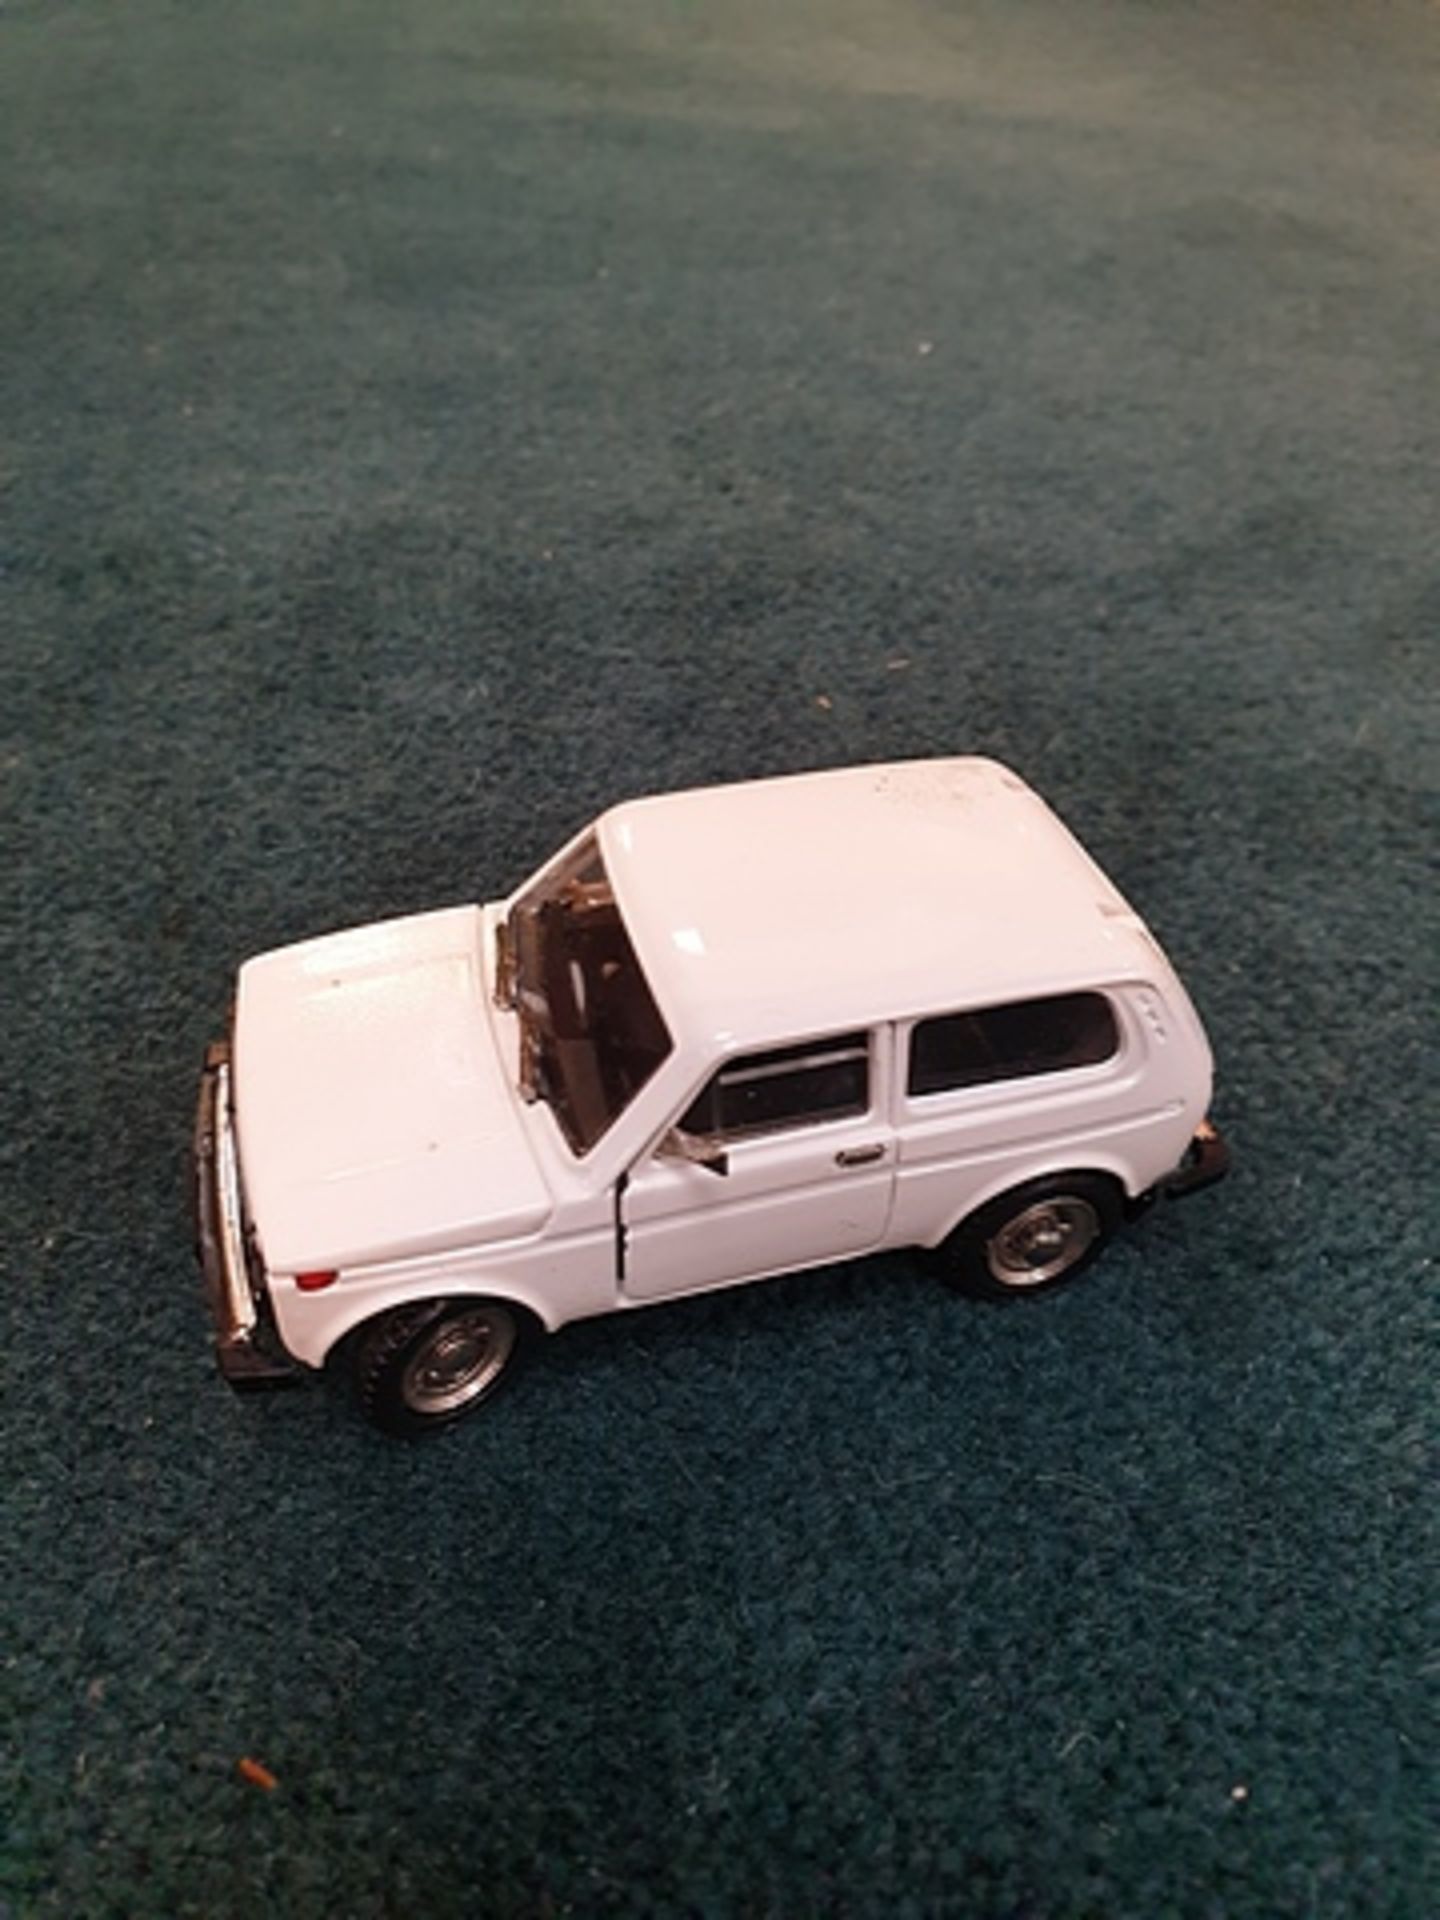 Novoexport (Russia) Diecast Made In USSR BA3 2121 Lada In White Scale 1/43 Boxed - Image 2 of 4